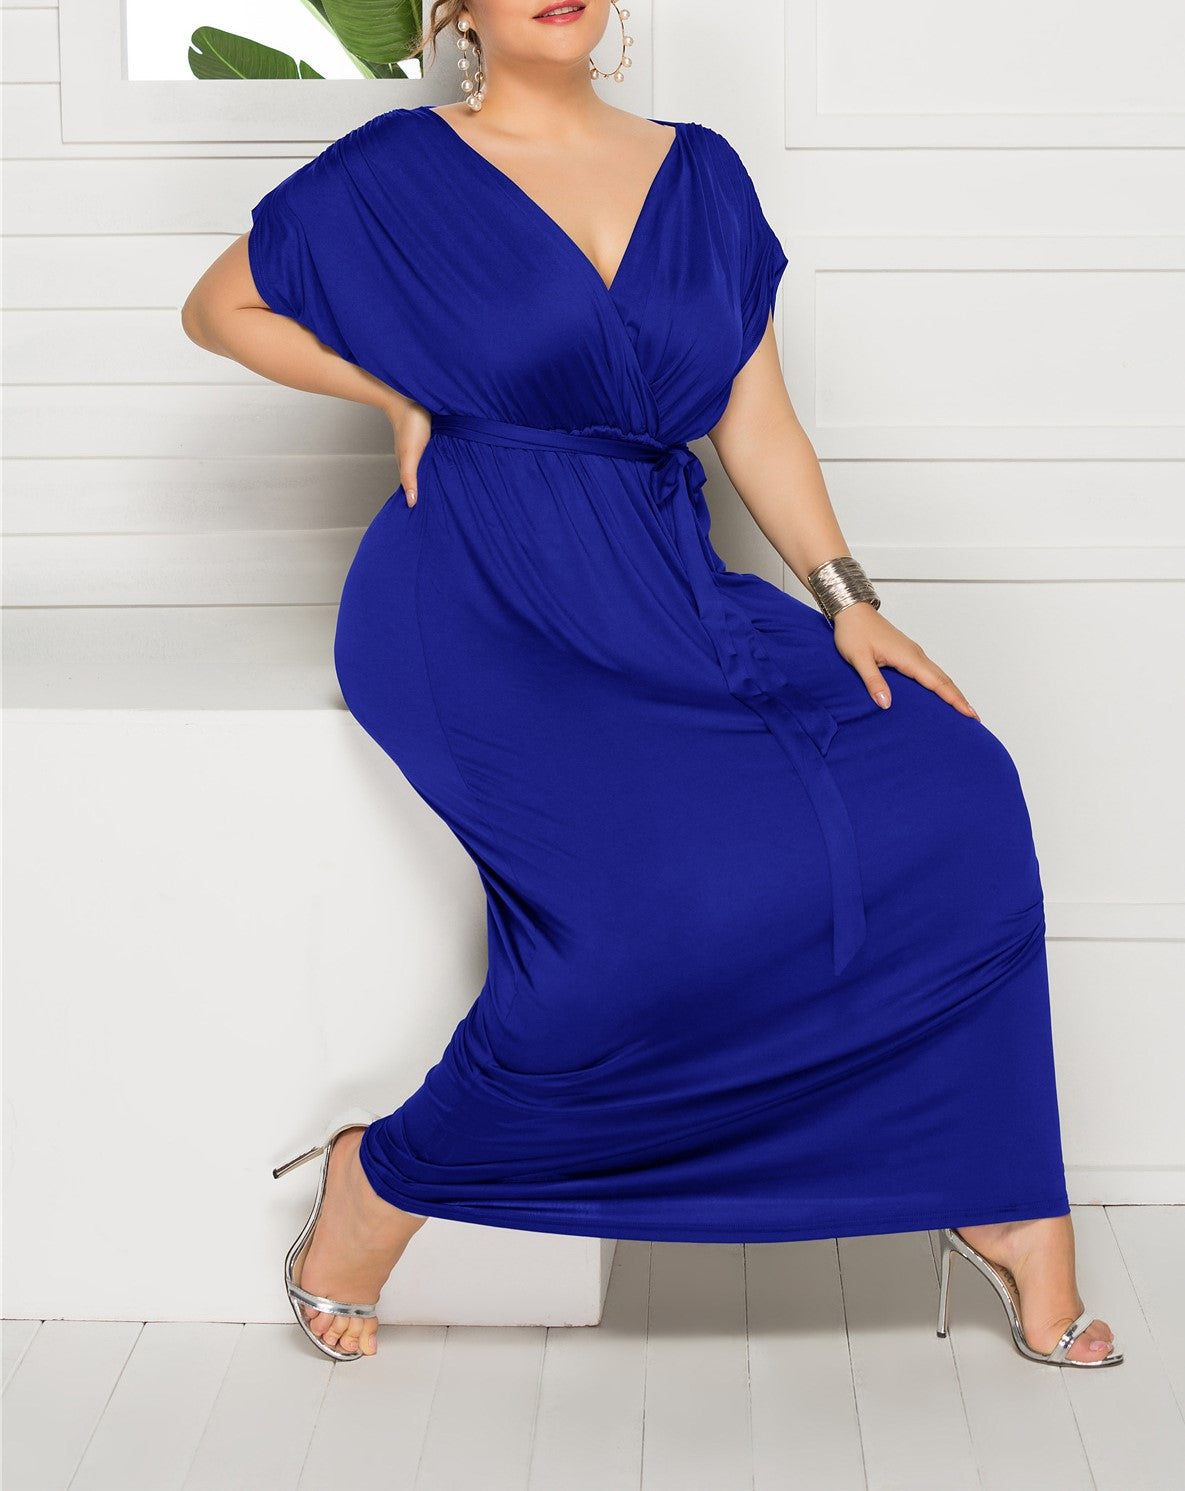 Women's Sexy Solid V-Neck Loose Big Swing Plus Size Dress